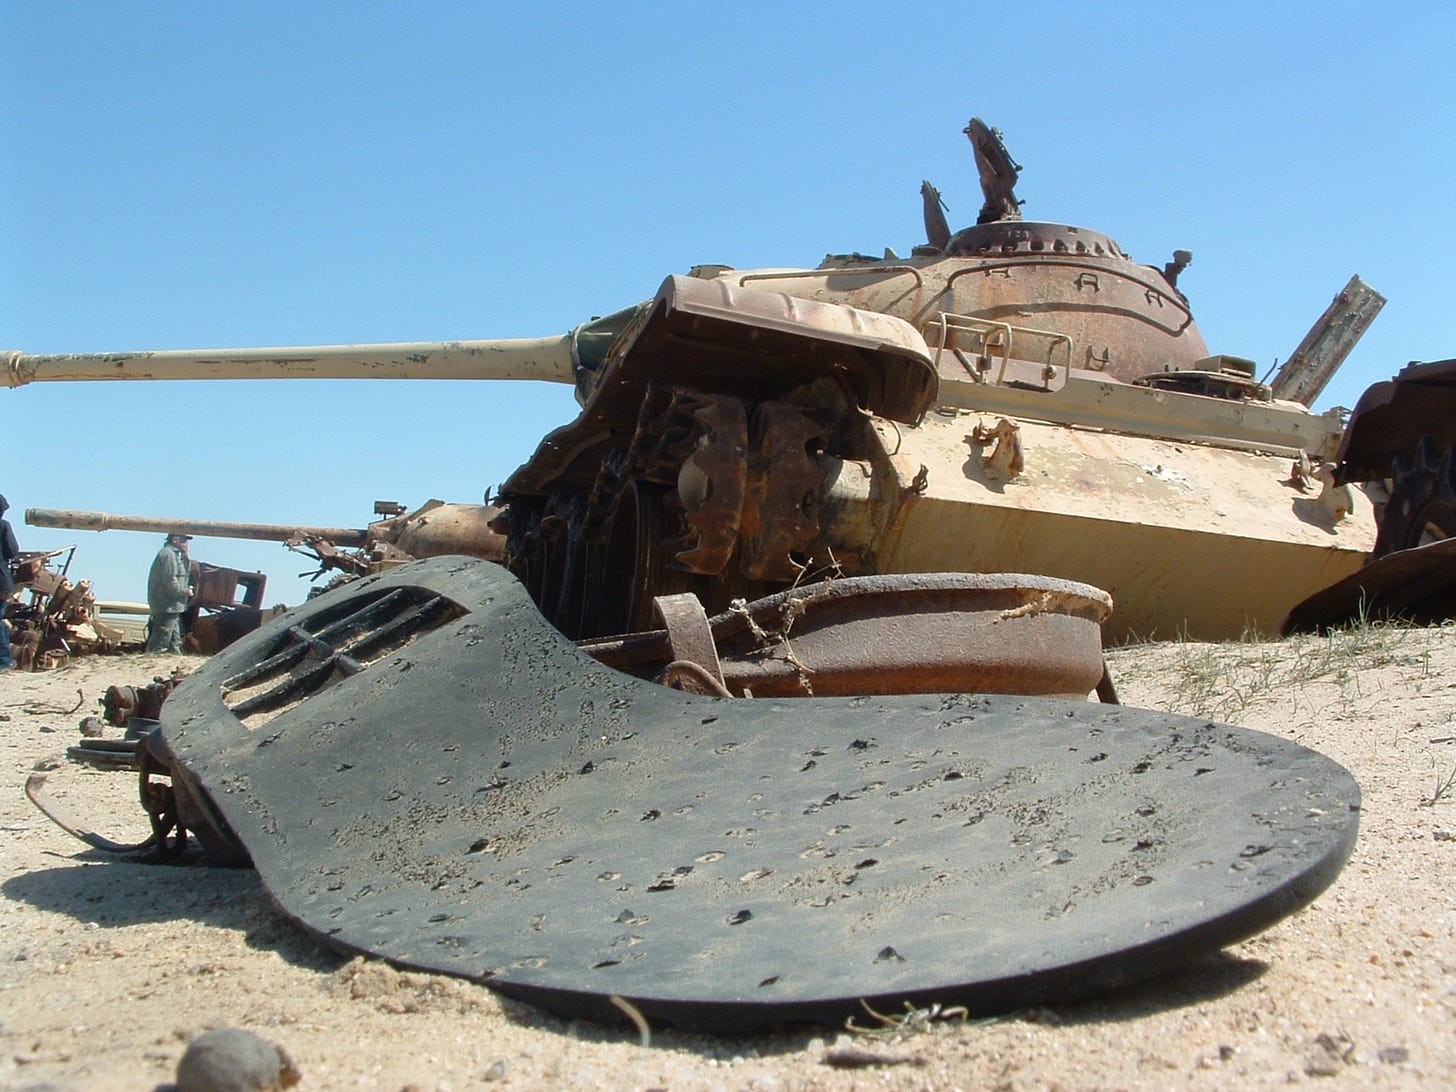 The sole of a shoe can be seen in the foreground. Behind it are the wrecks of multiple tanks, and other ruined military machines, blasted and weathered.